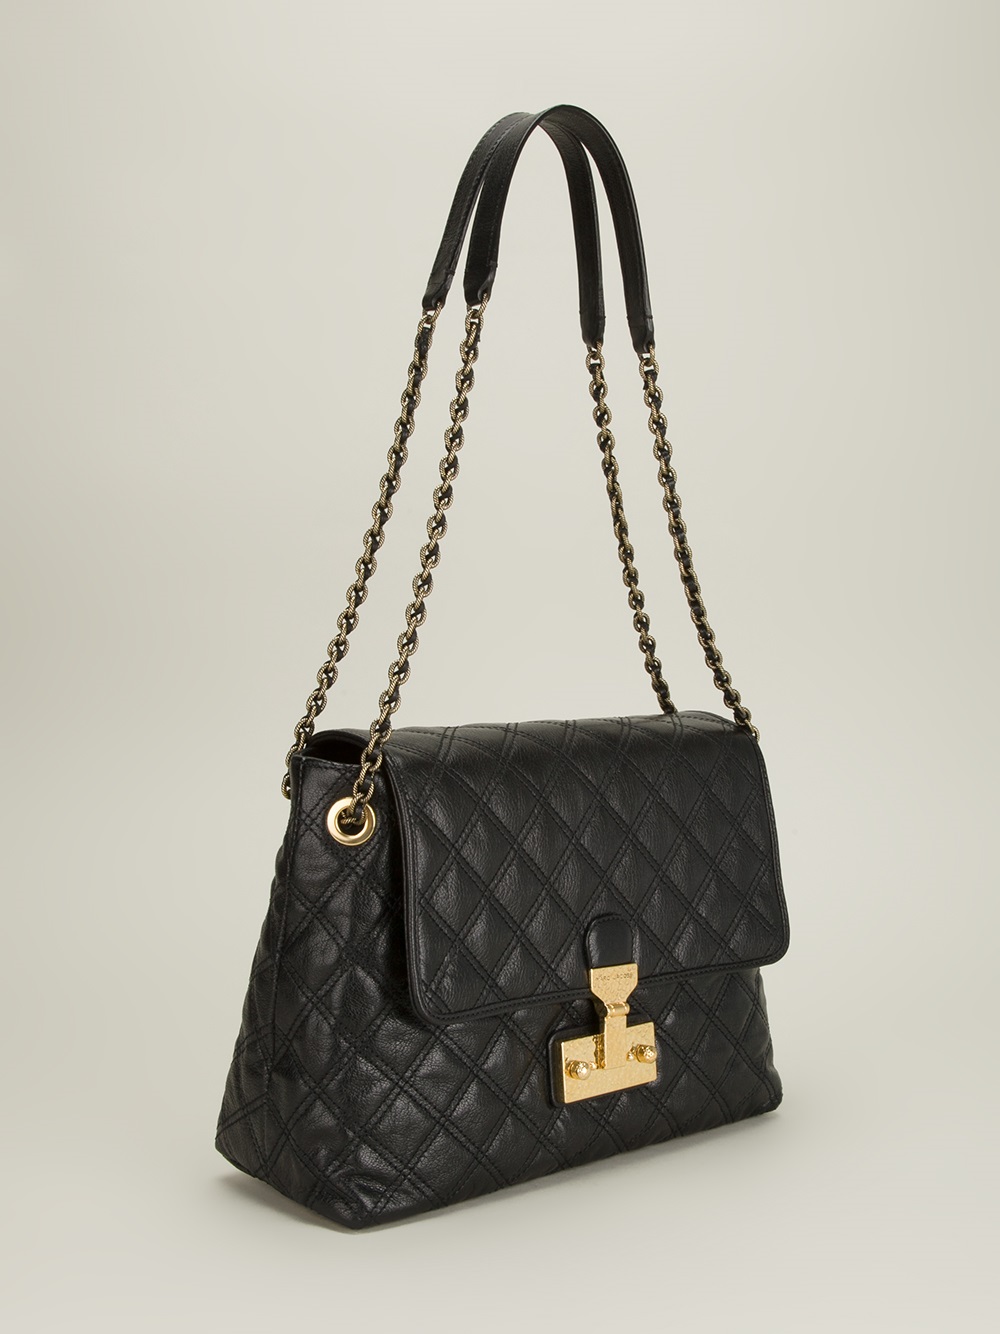 Marc Jacobs Quilted The Xl Single Shoulder Bag in Black - Lyst